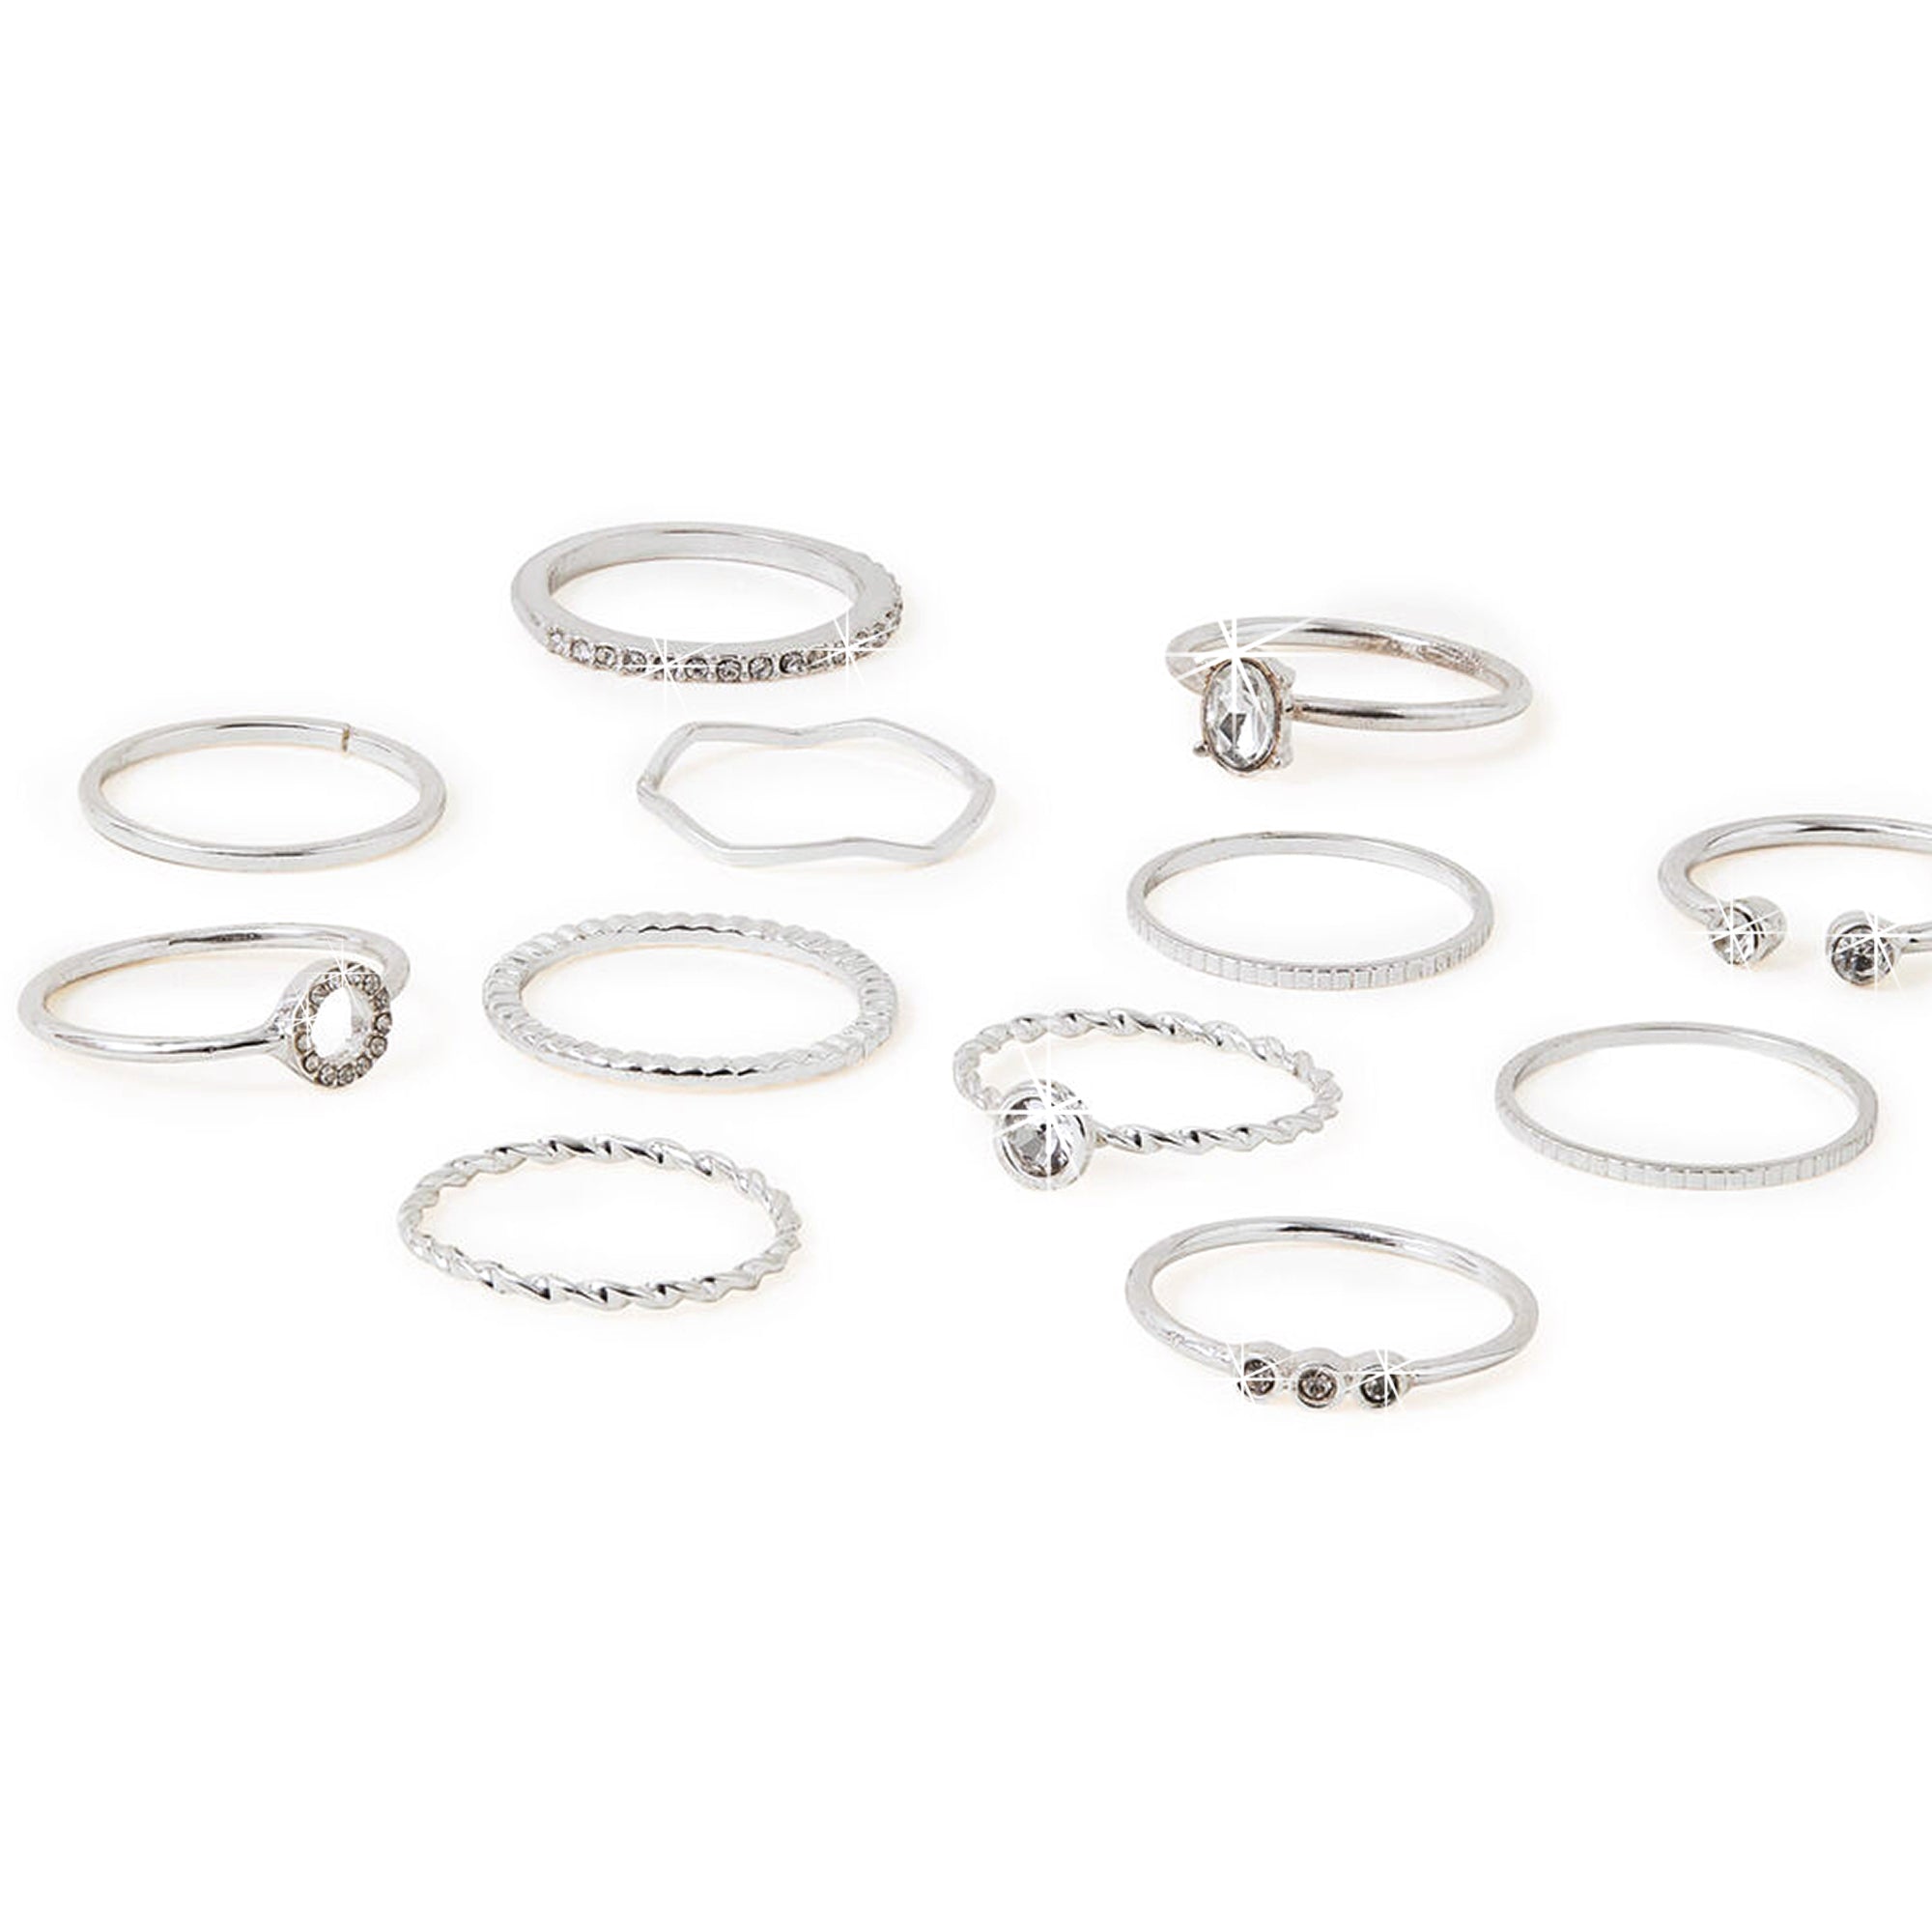 Accessorize London Women's Silver Crystal Ring Pack Of 12 Small